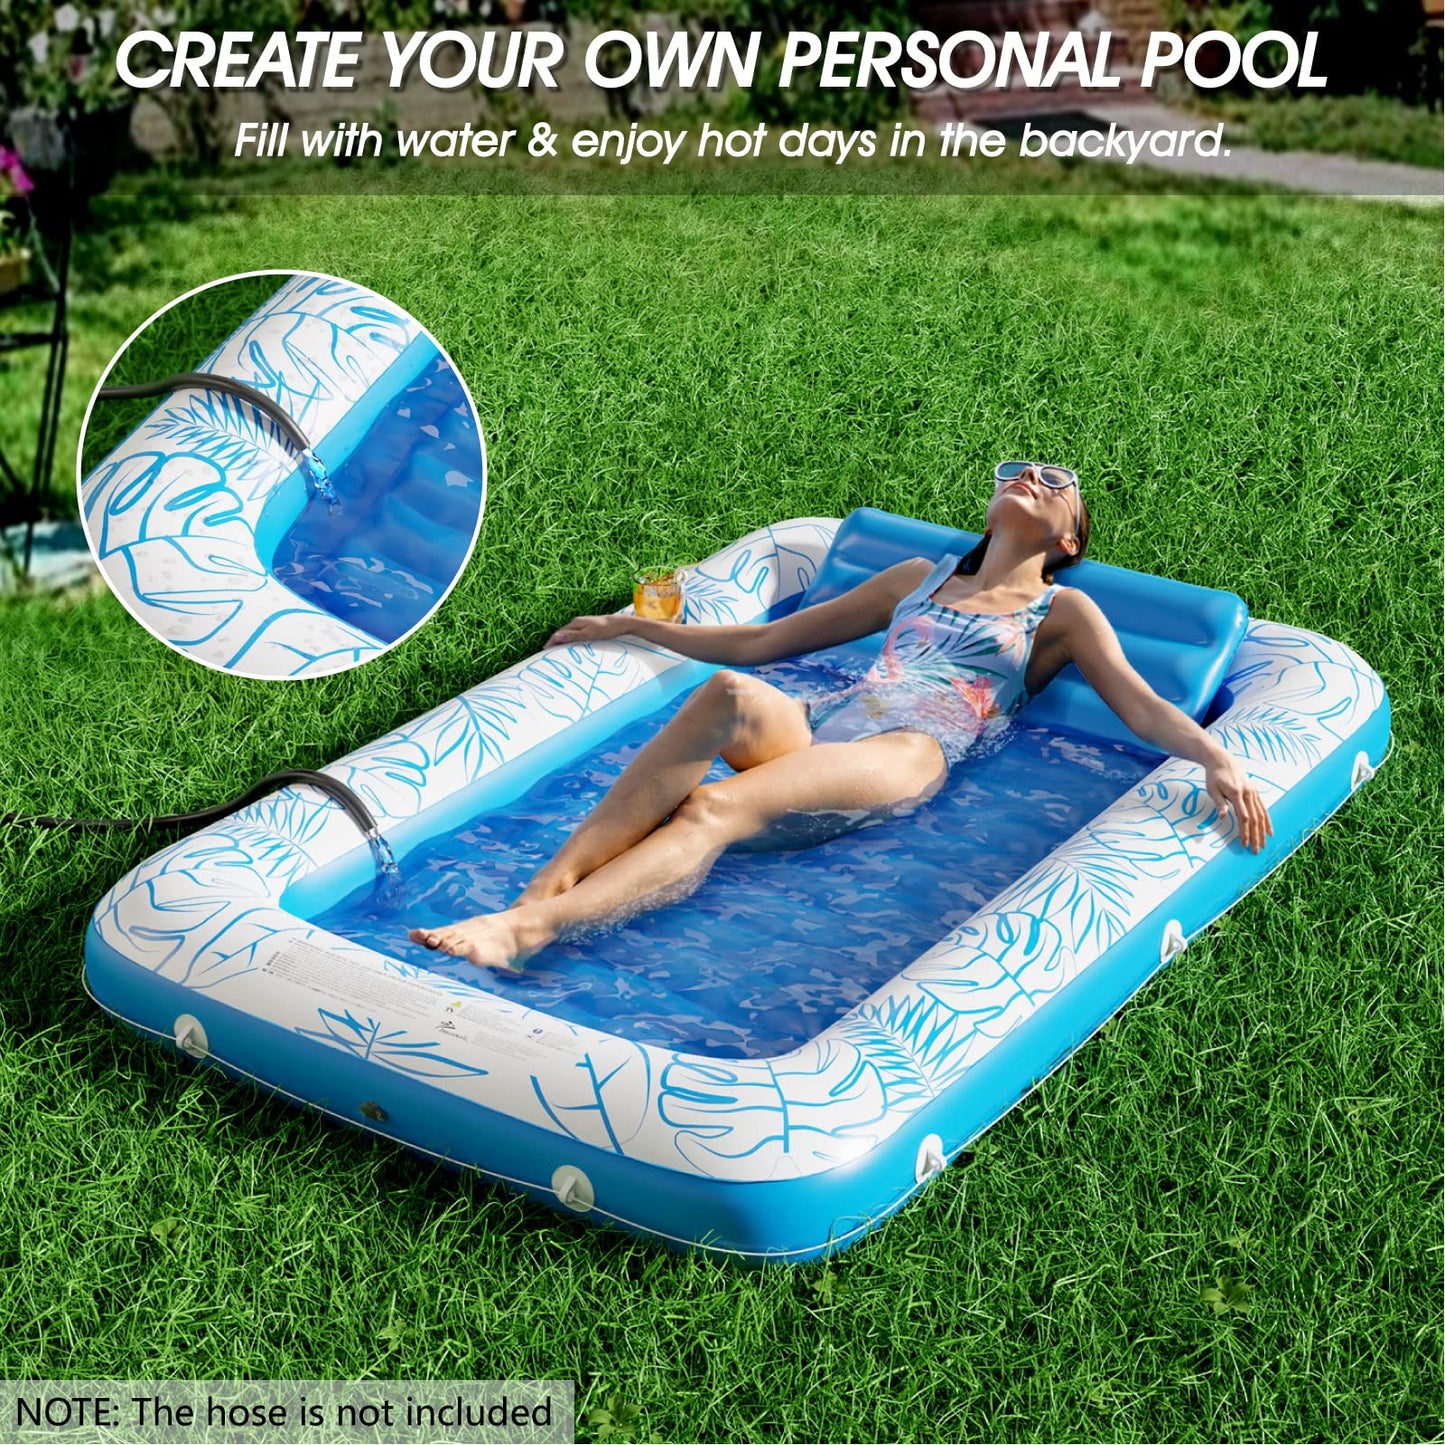 Luxury Inflatable Tanning Pool | Versatile Outdoor Lounger with Premium Comfort Features